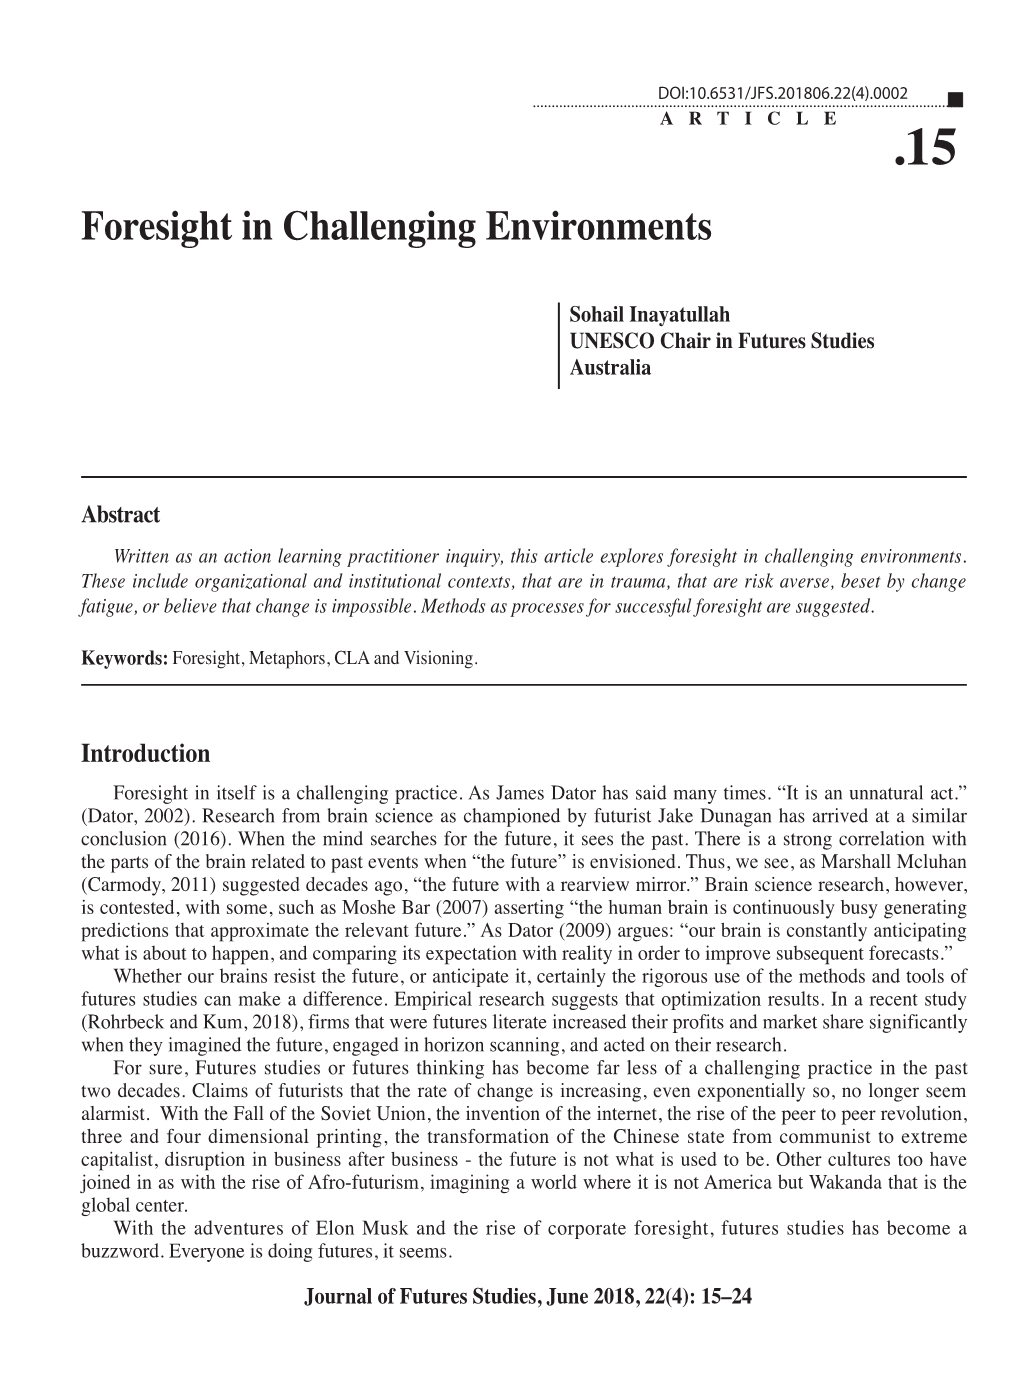 Foresight in Challenging Environments